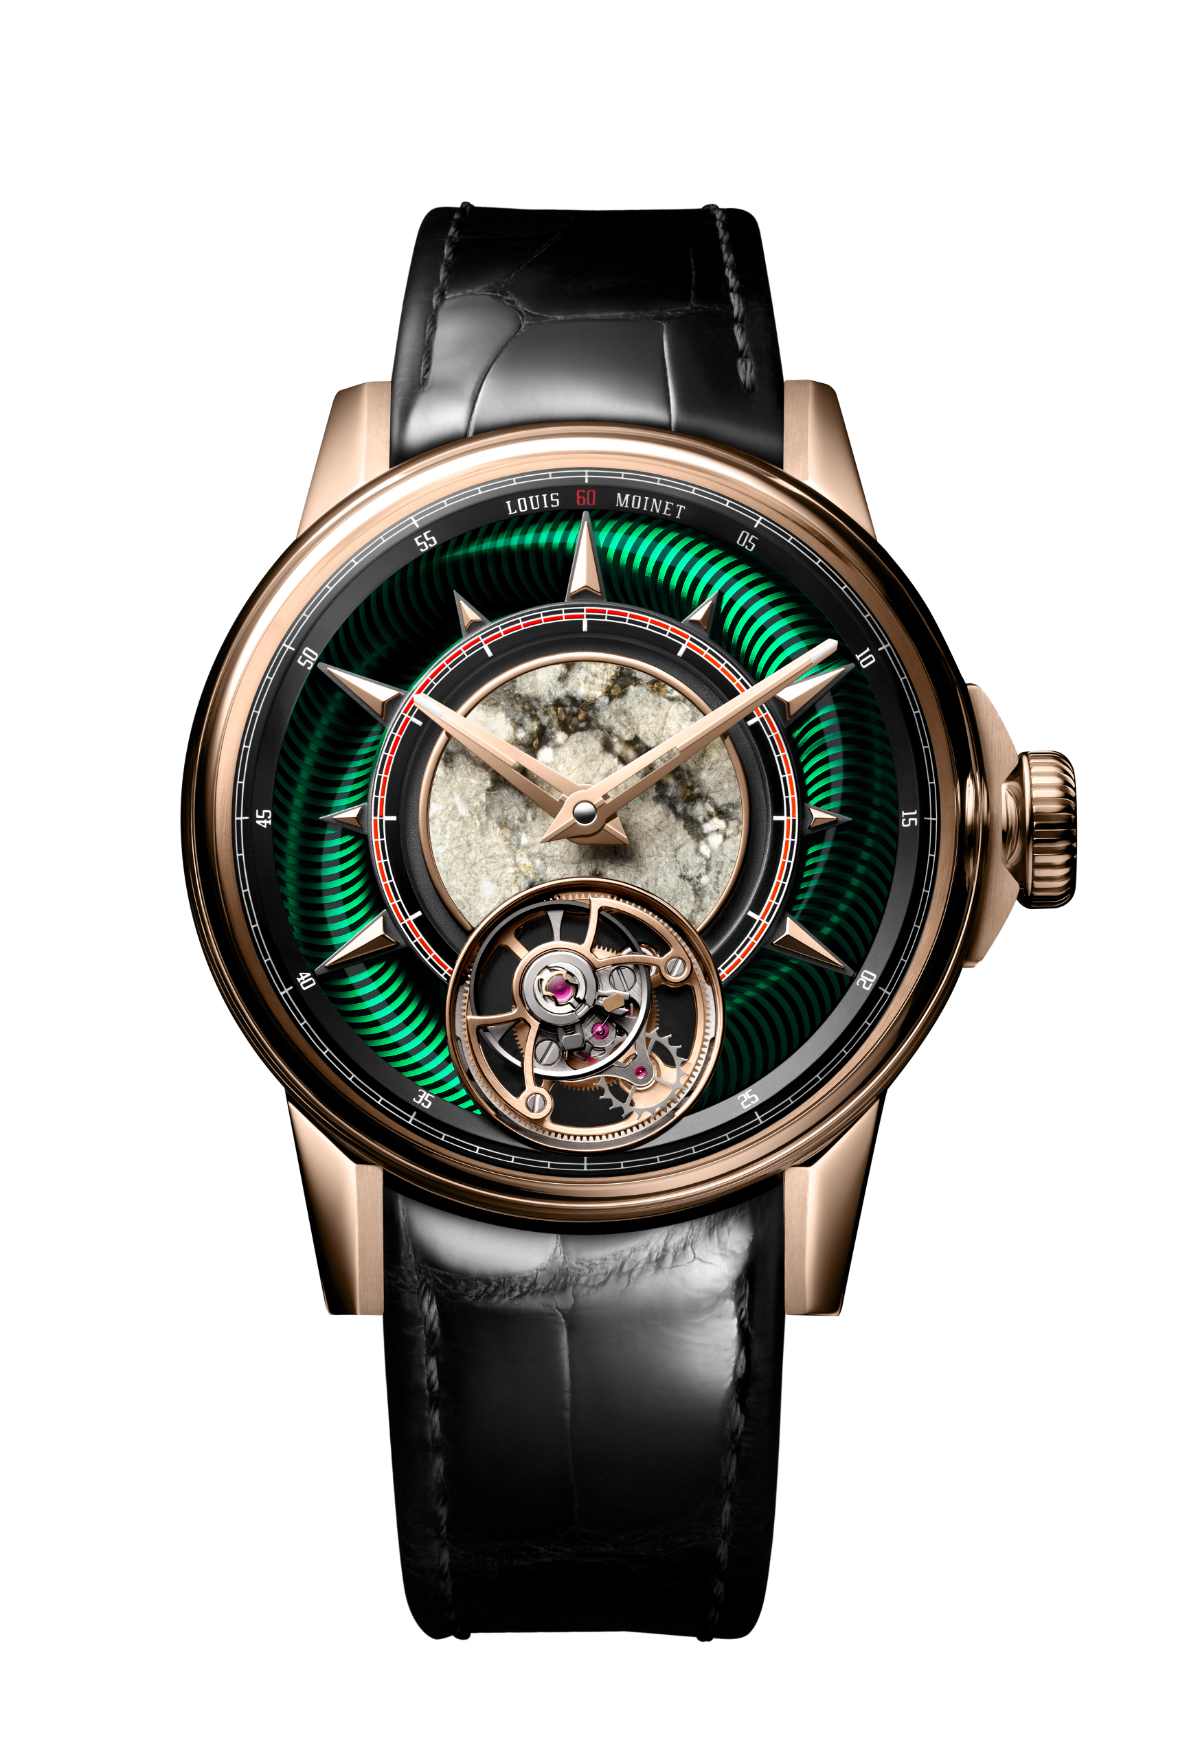 Louis Moinet Introduces Its New Jules Verne “To The Moon” Tourbillon